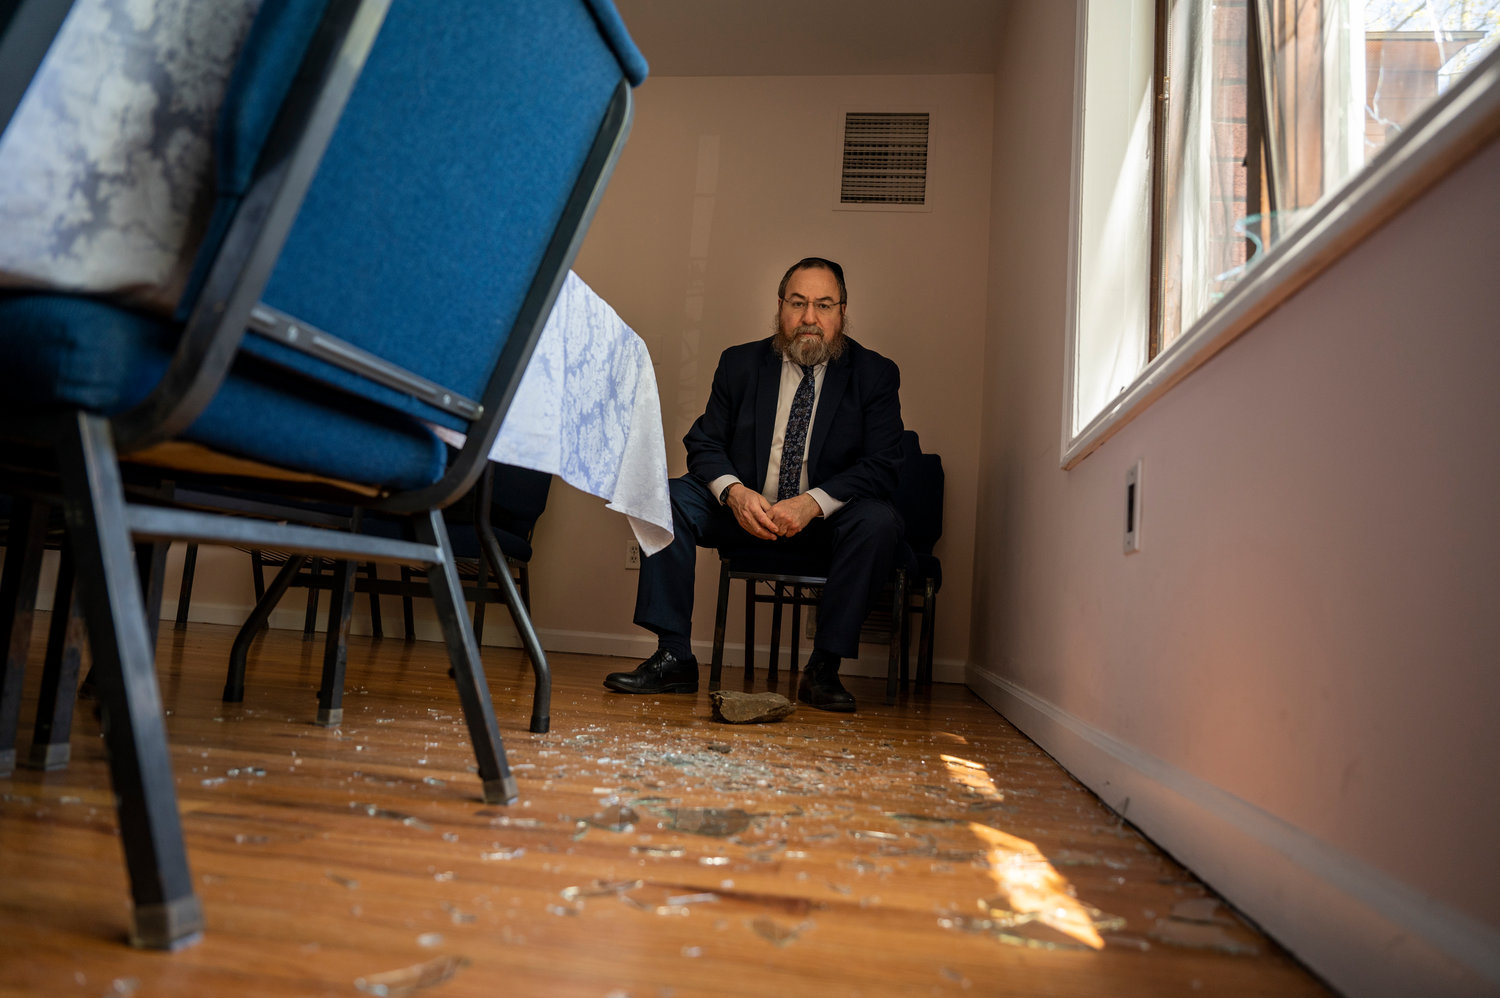 Rabbi Levi Shemtov says he’s very disturbed by the vandalism of his synagogue, Chabad Lubavitch of Riverdale, last April when his shul was one of four targeted by a person police suspects smashed windows with rocks.